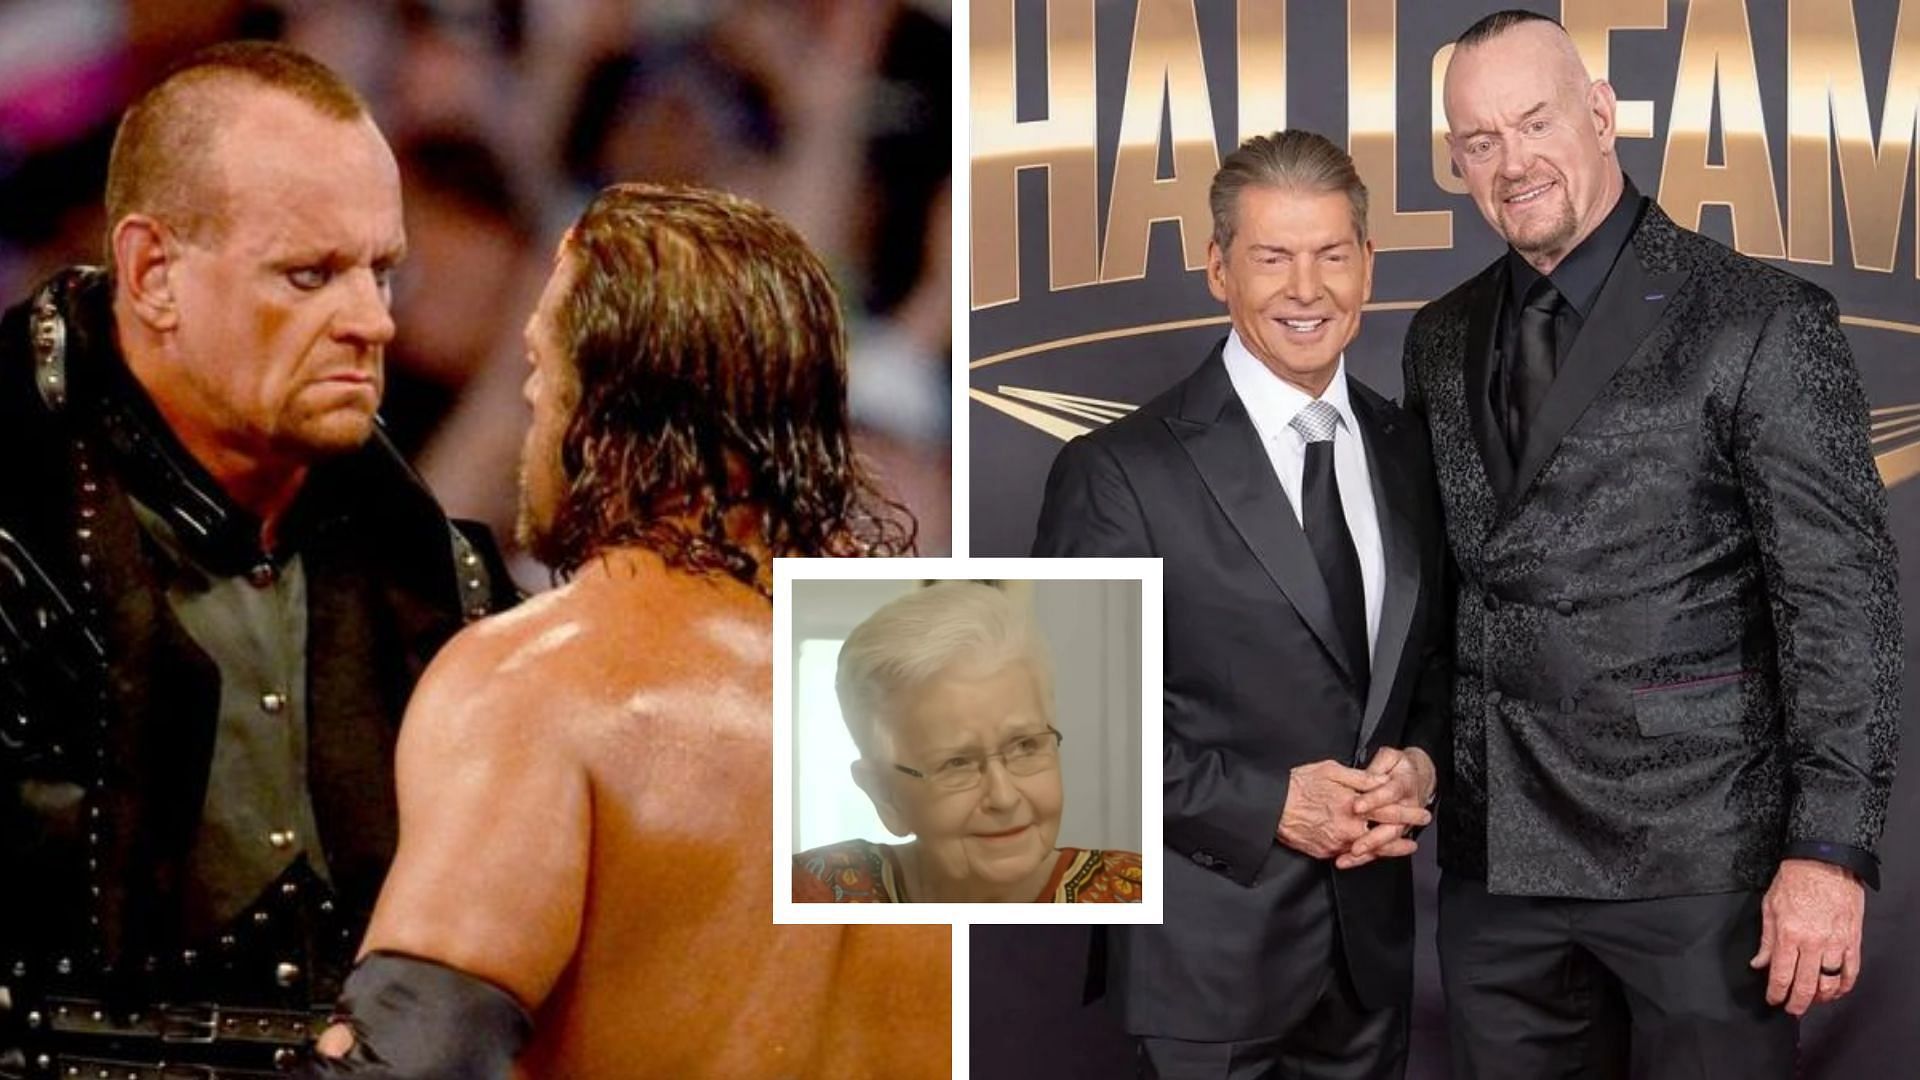 The Undertaker is friends with Triple H (left) and Vince McMahon (right) in real life.